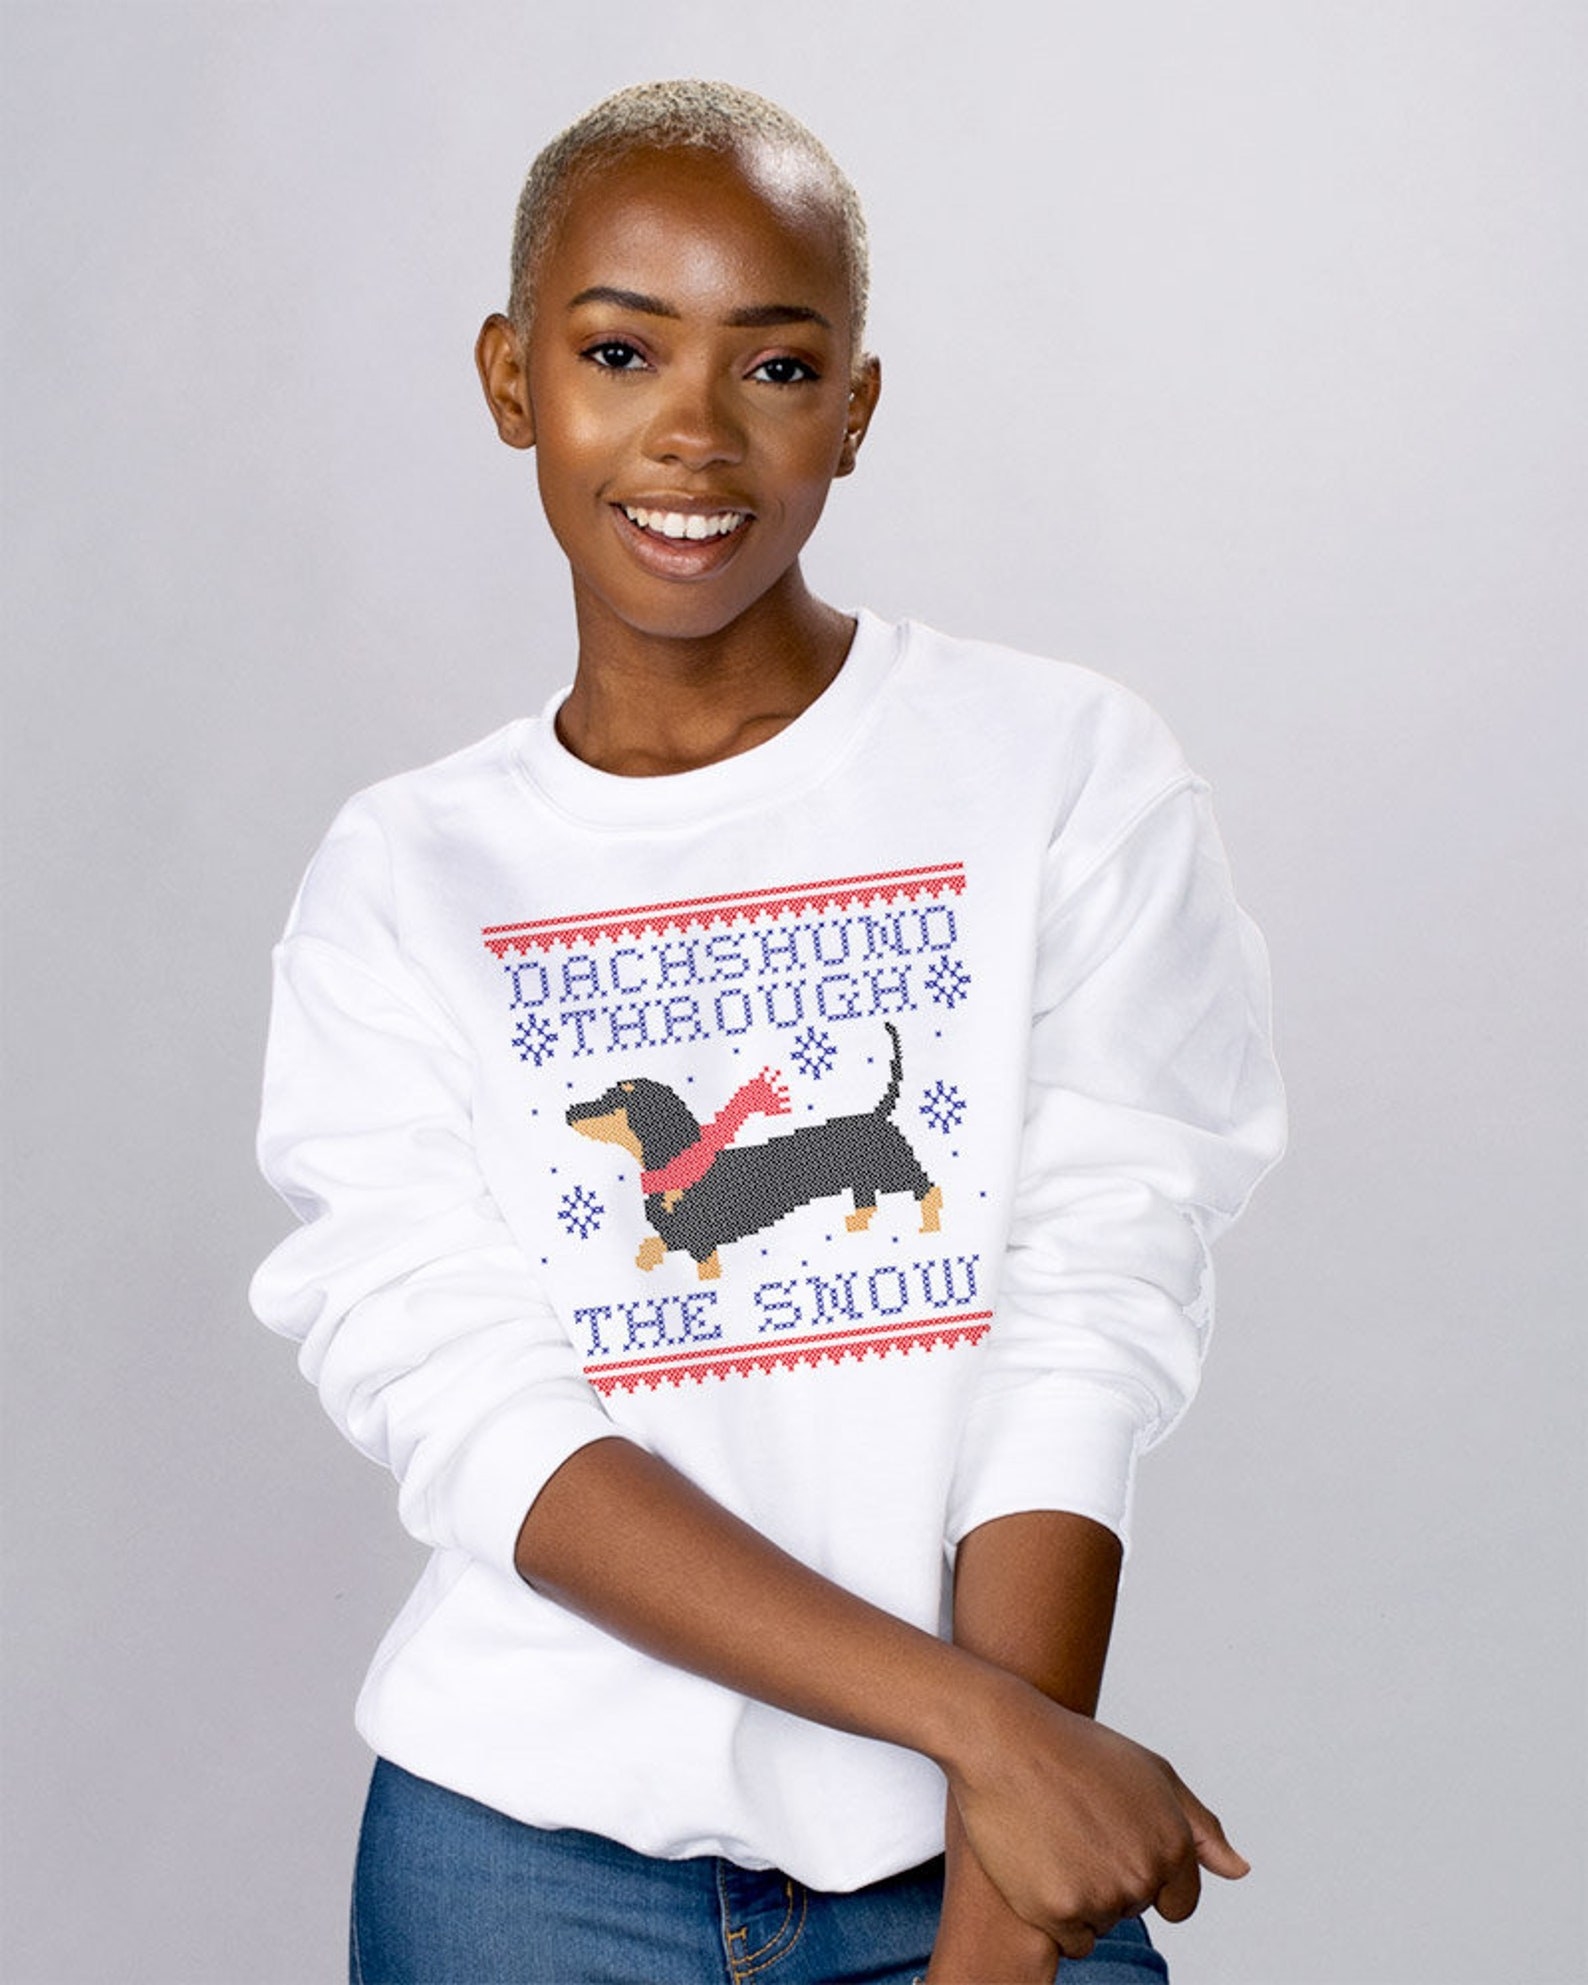 A model in the white crewneck with &quot;dachshund through the snow&quot; in cross-stitch style text and a dachshund in a red scarf